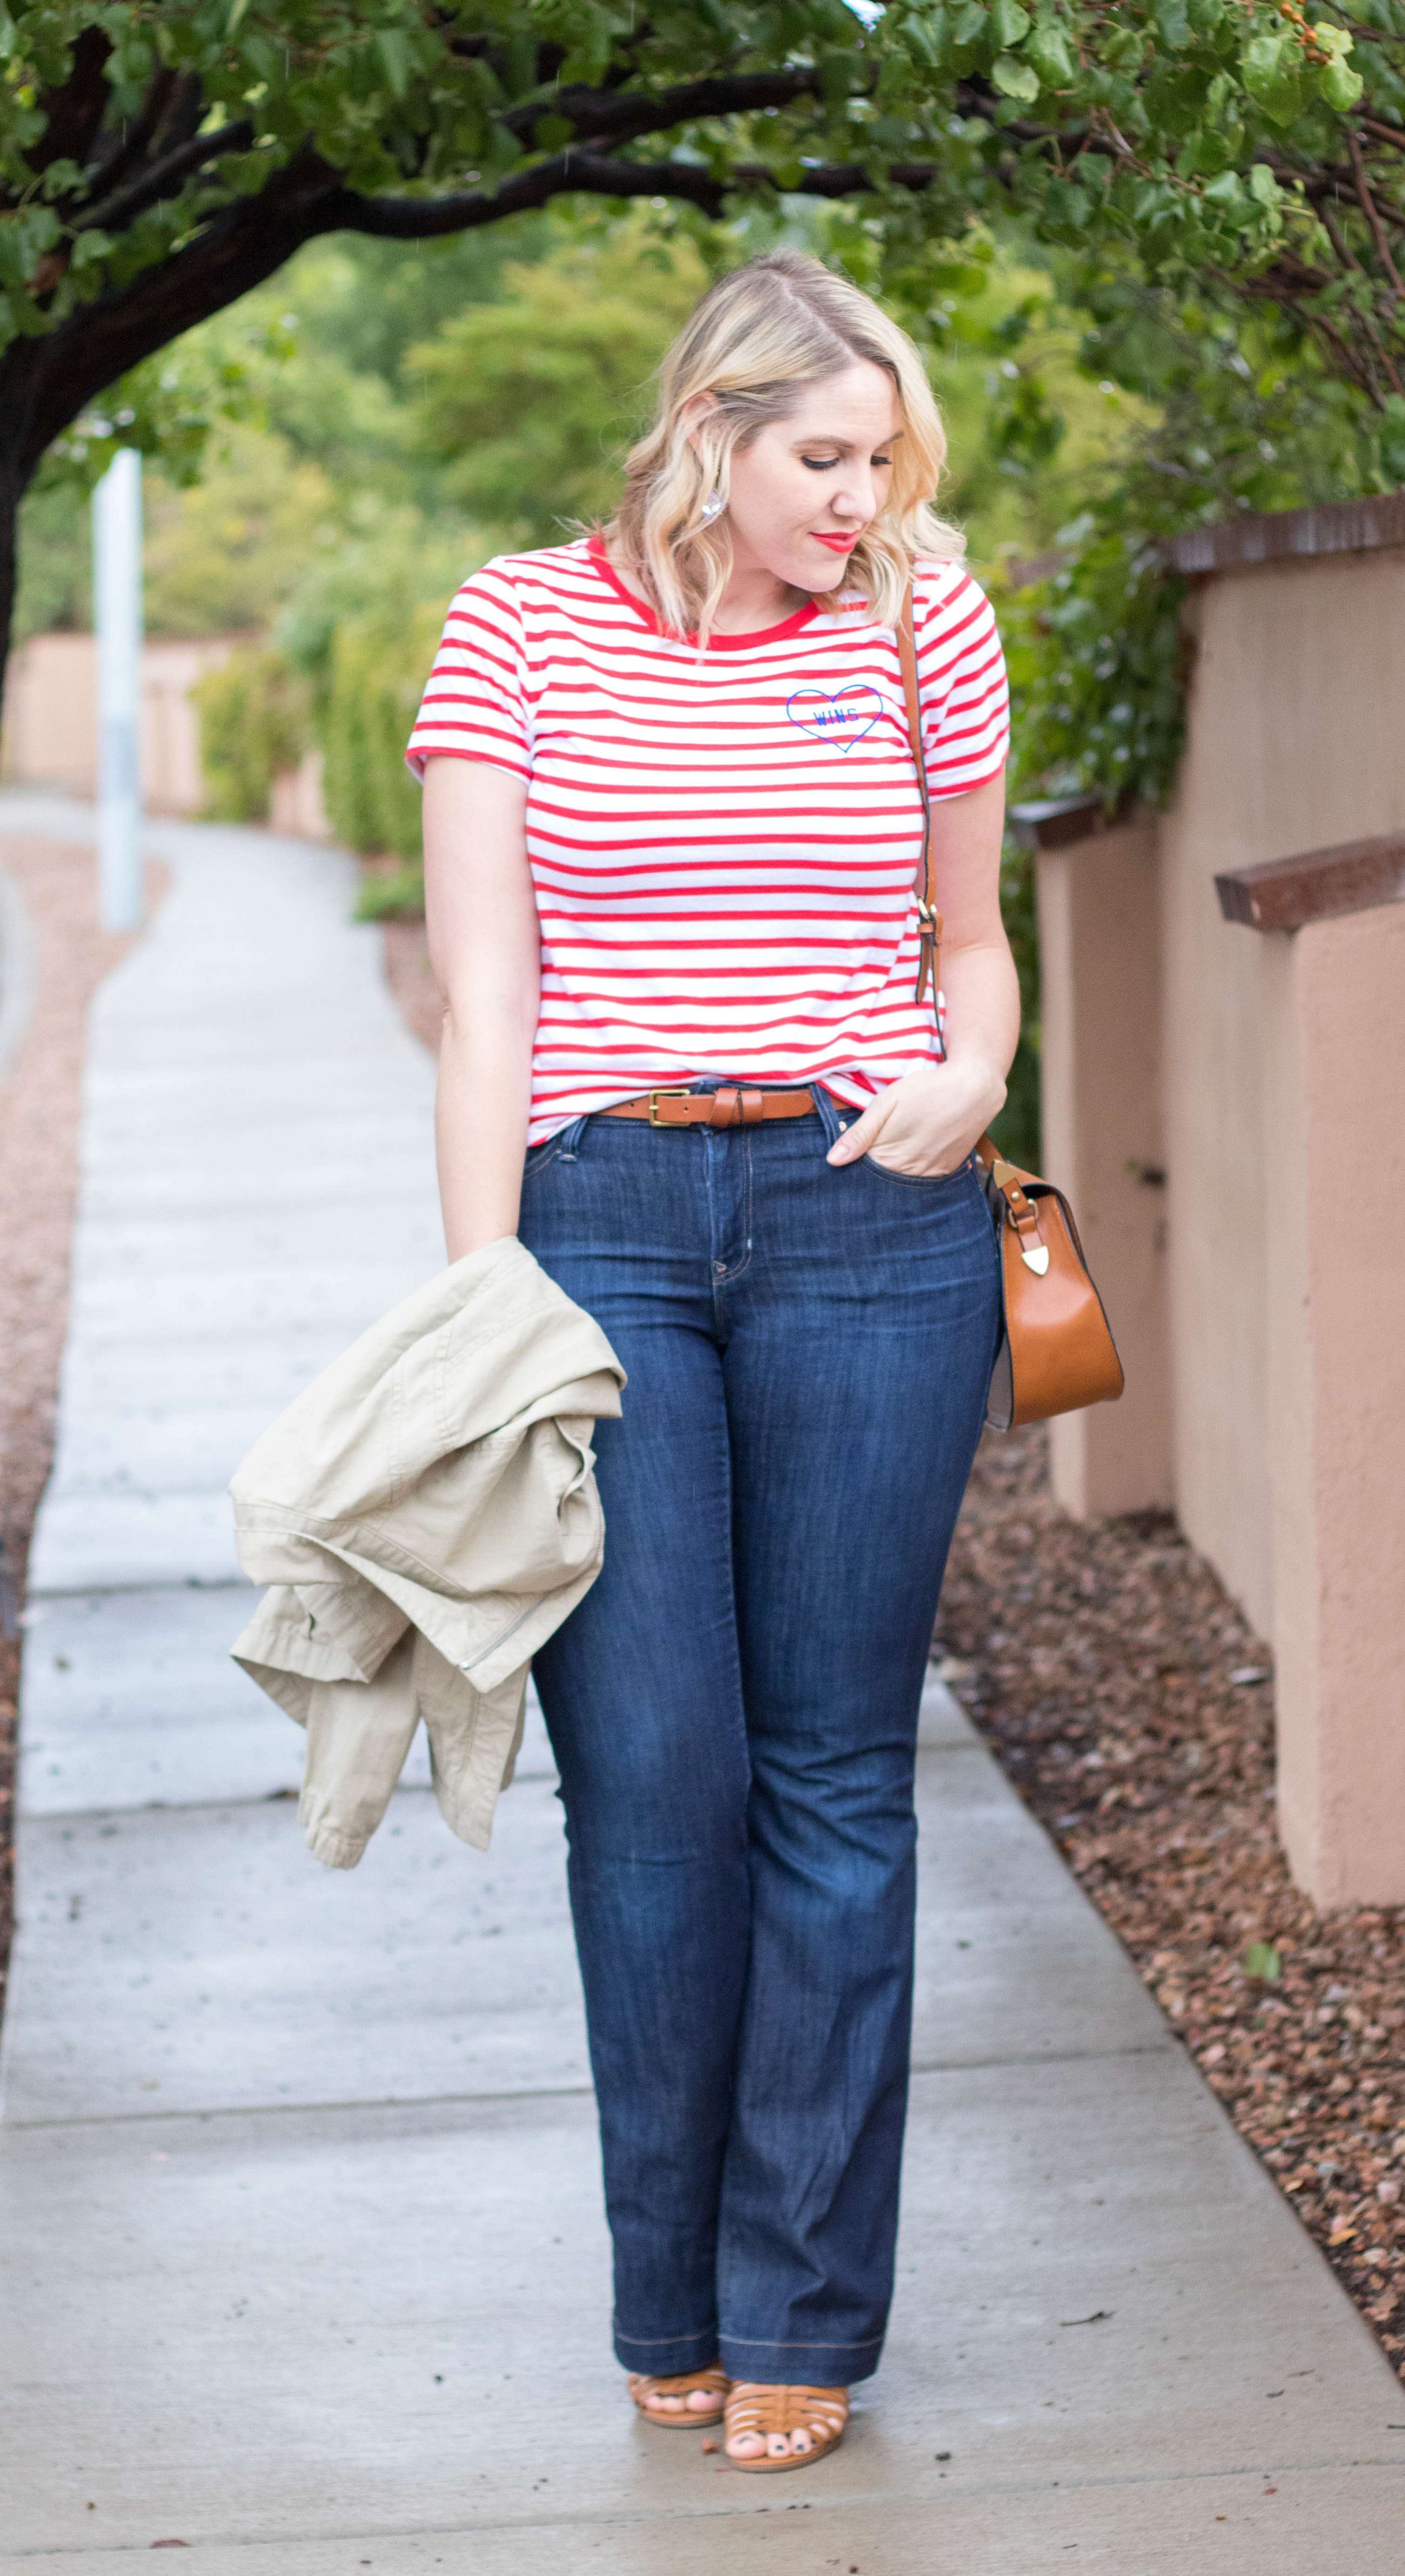 graphic striped tee outfit #oldnavy #fallstyle #flarejeans